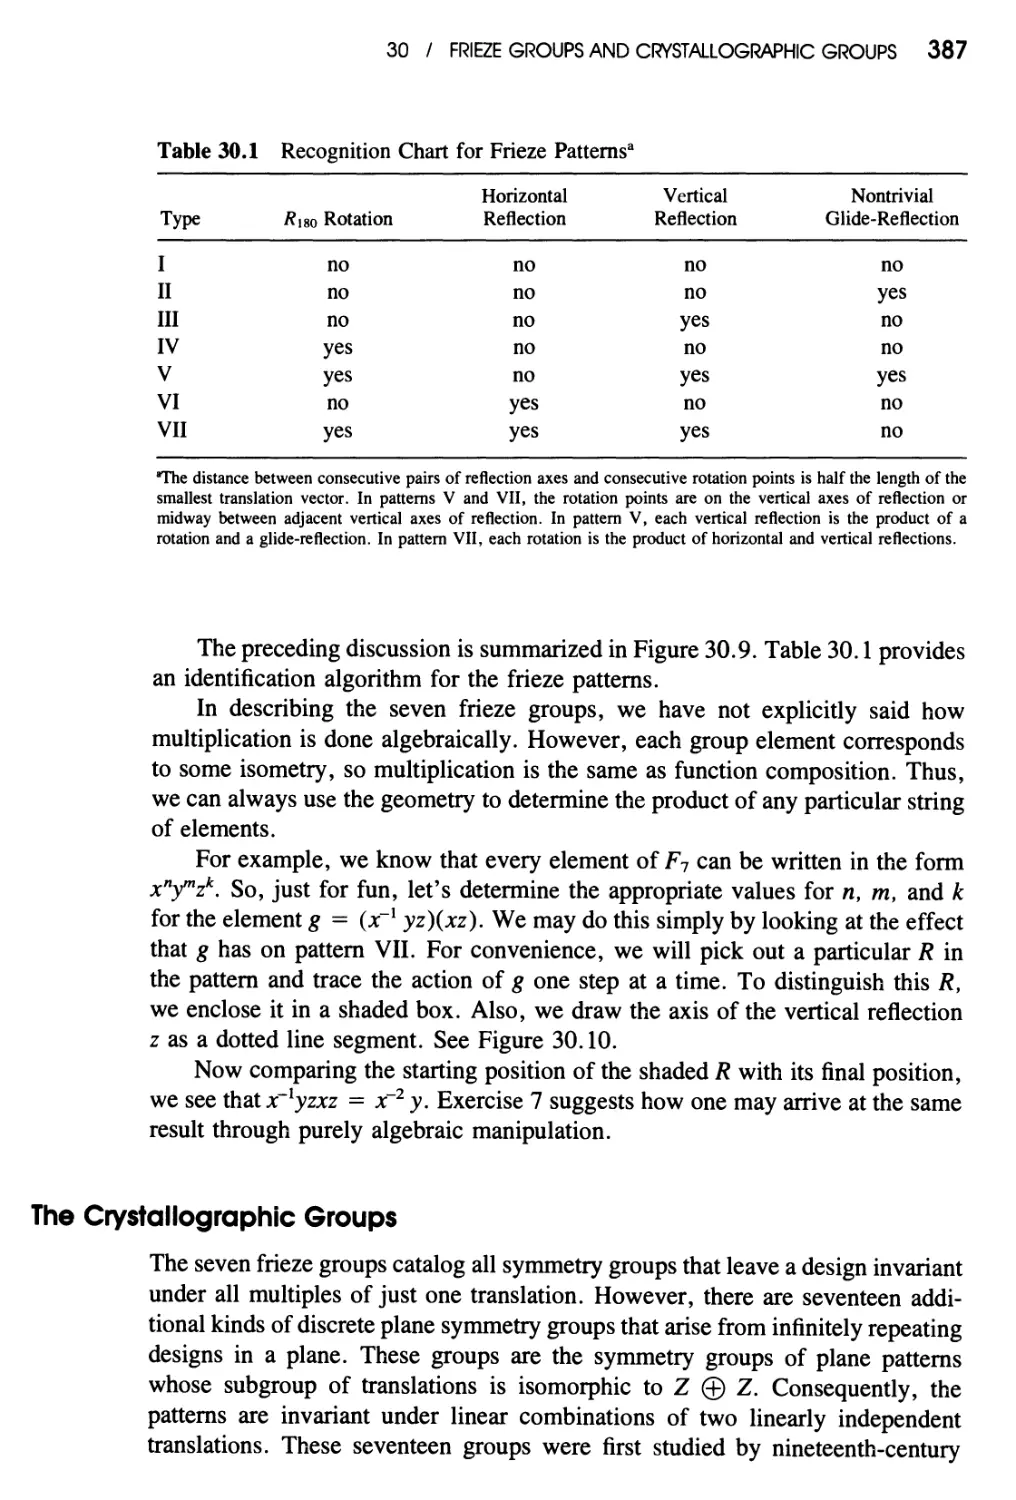 The Crystallographic Groups